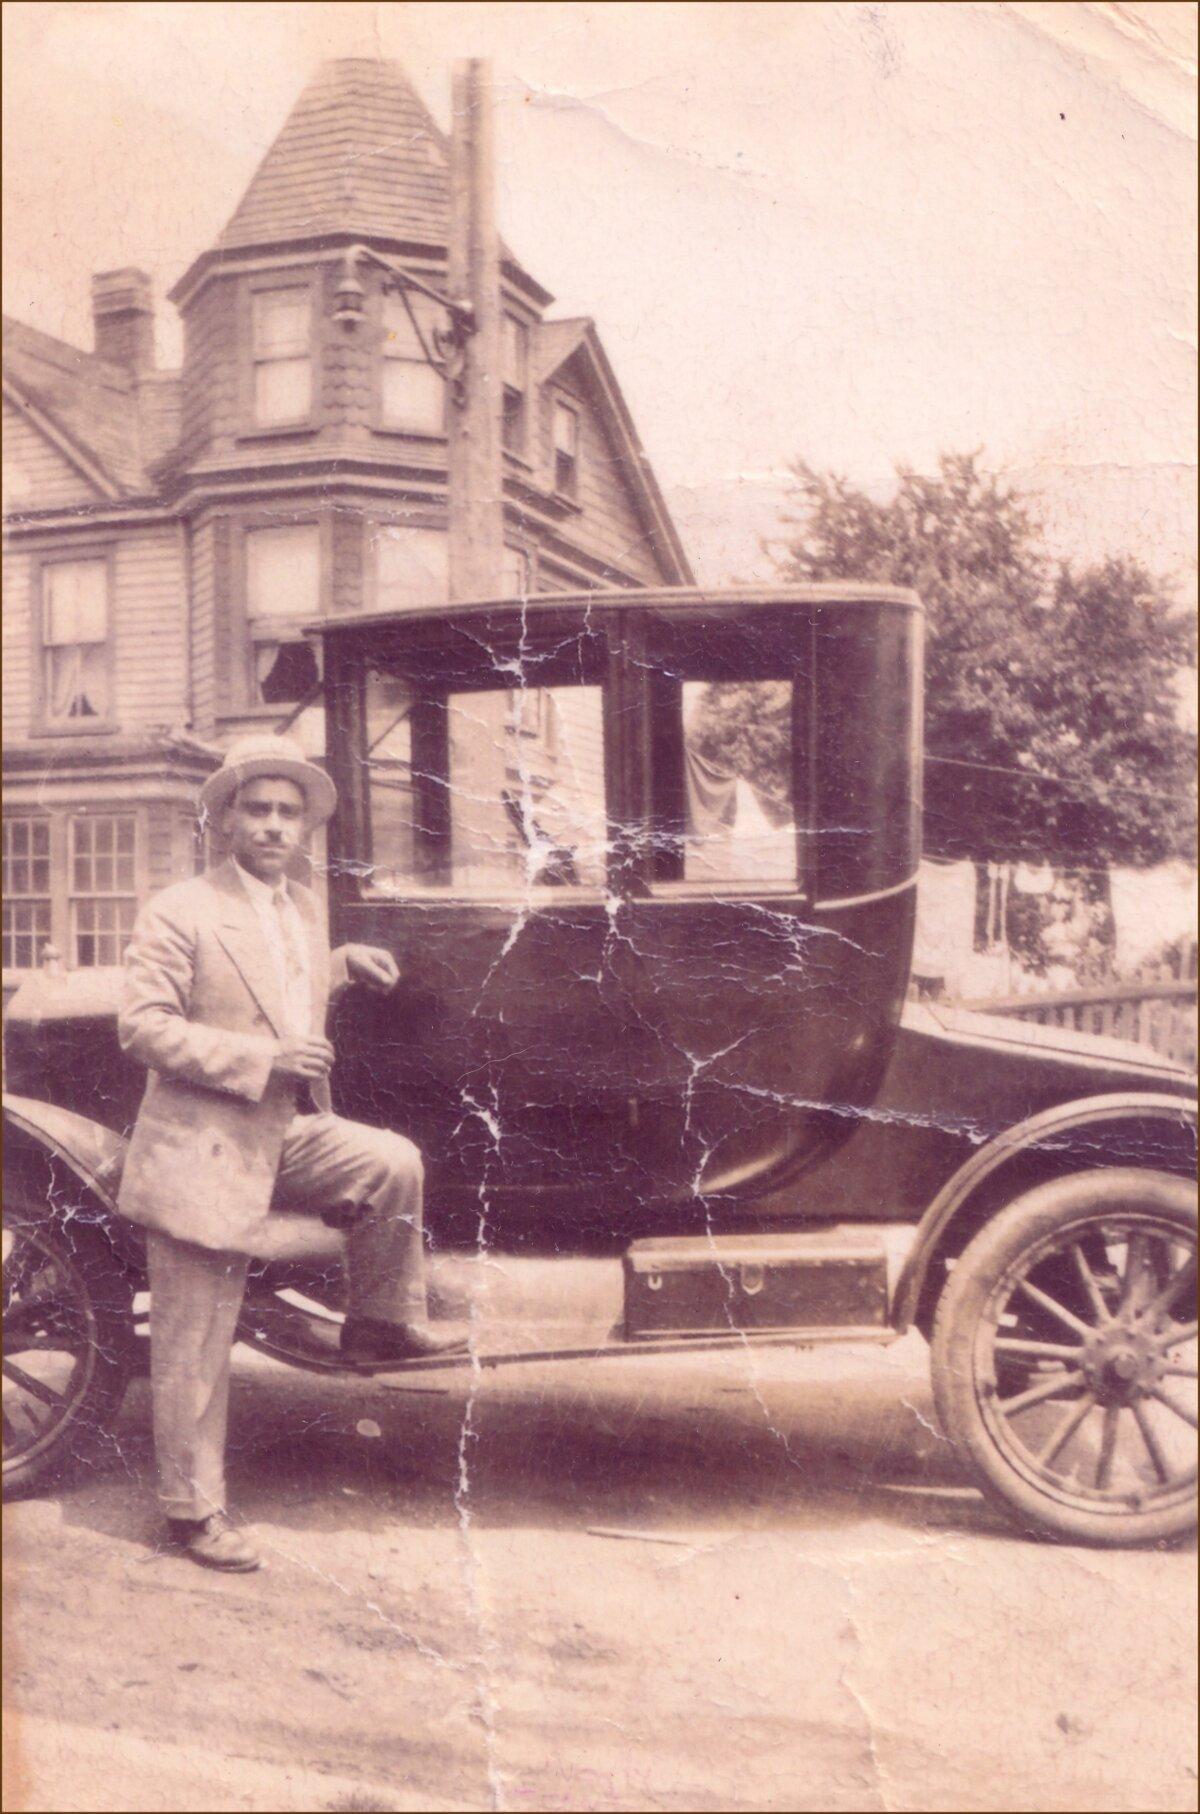 Critelli’s father with his 1918 Model-T Ford, in front of the house they eventually owned in Richmond Hill, New York, in 1929. He was the first one on the block to own a car. The house is still there. （Courtesy of Dominick Critelli）